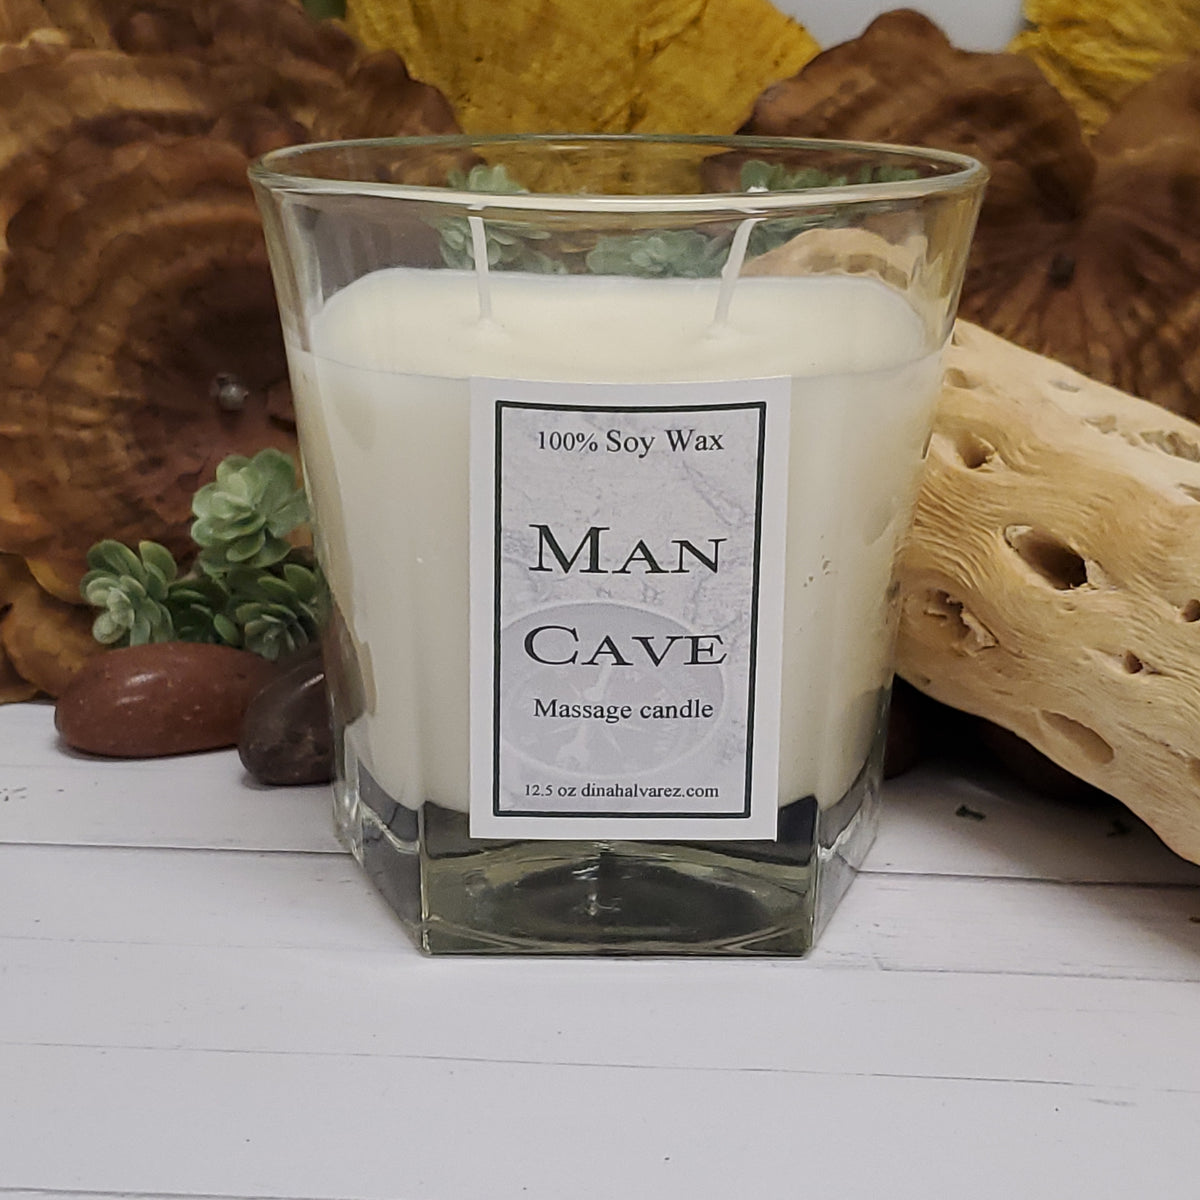 The Man Cave Massage Candle